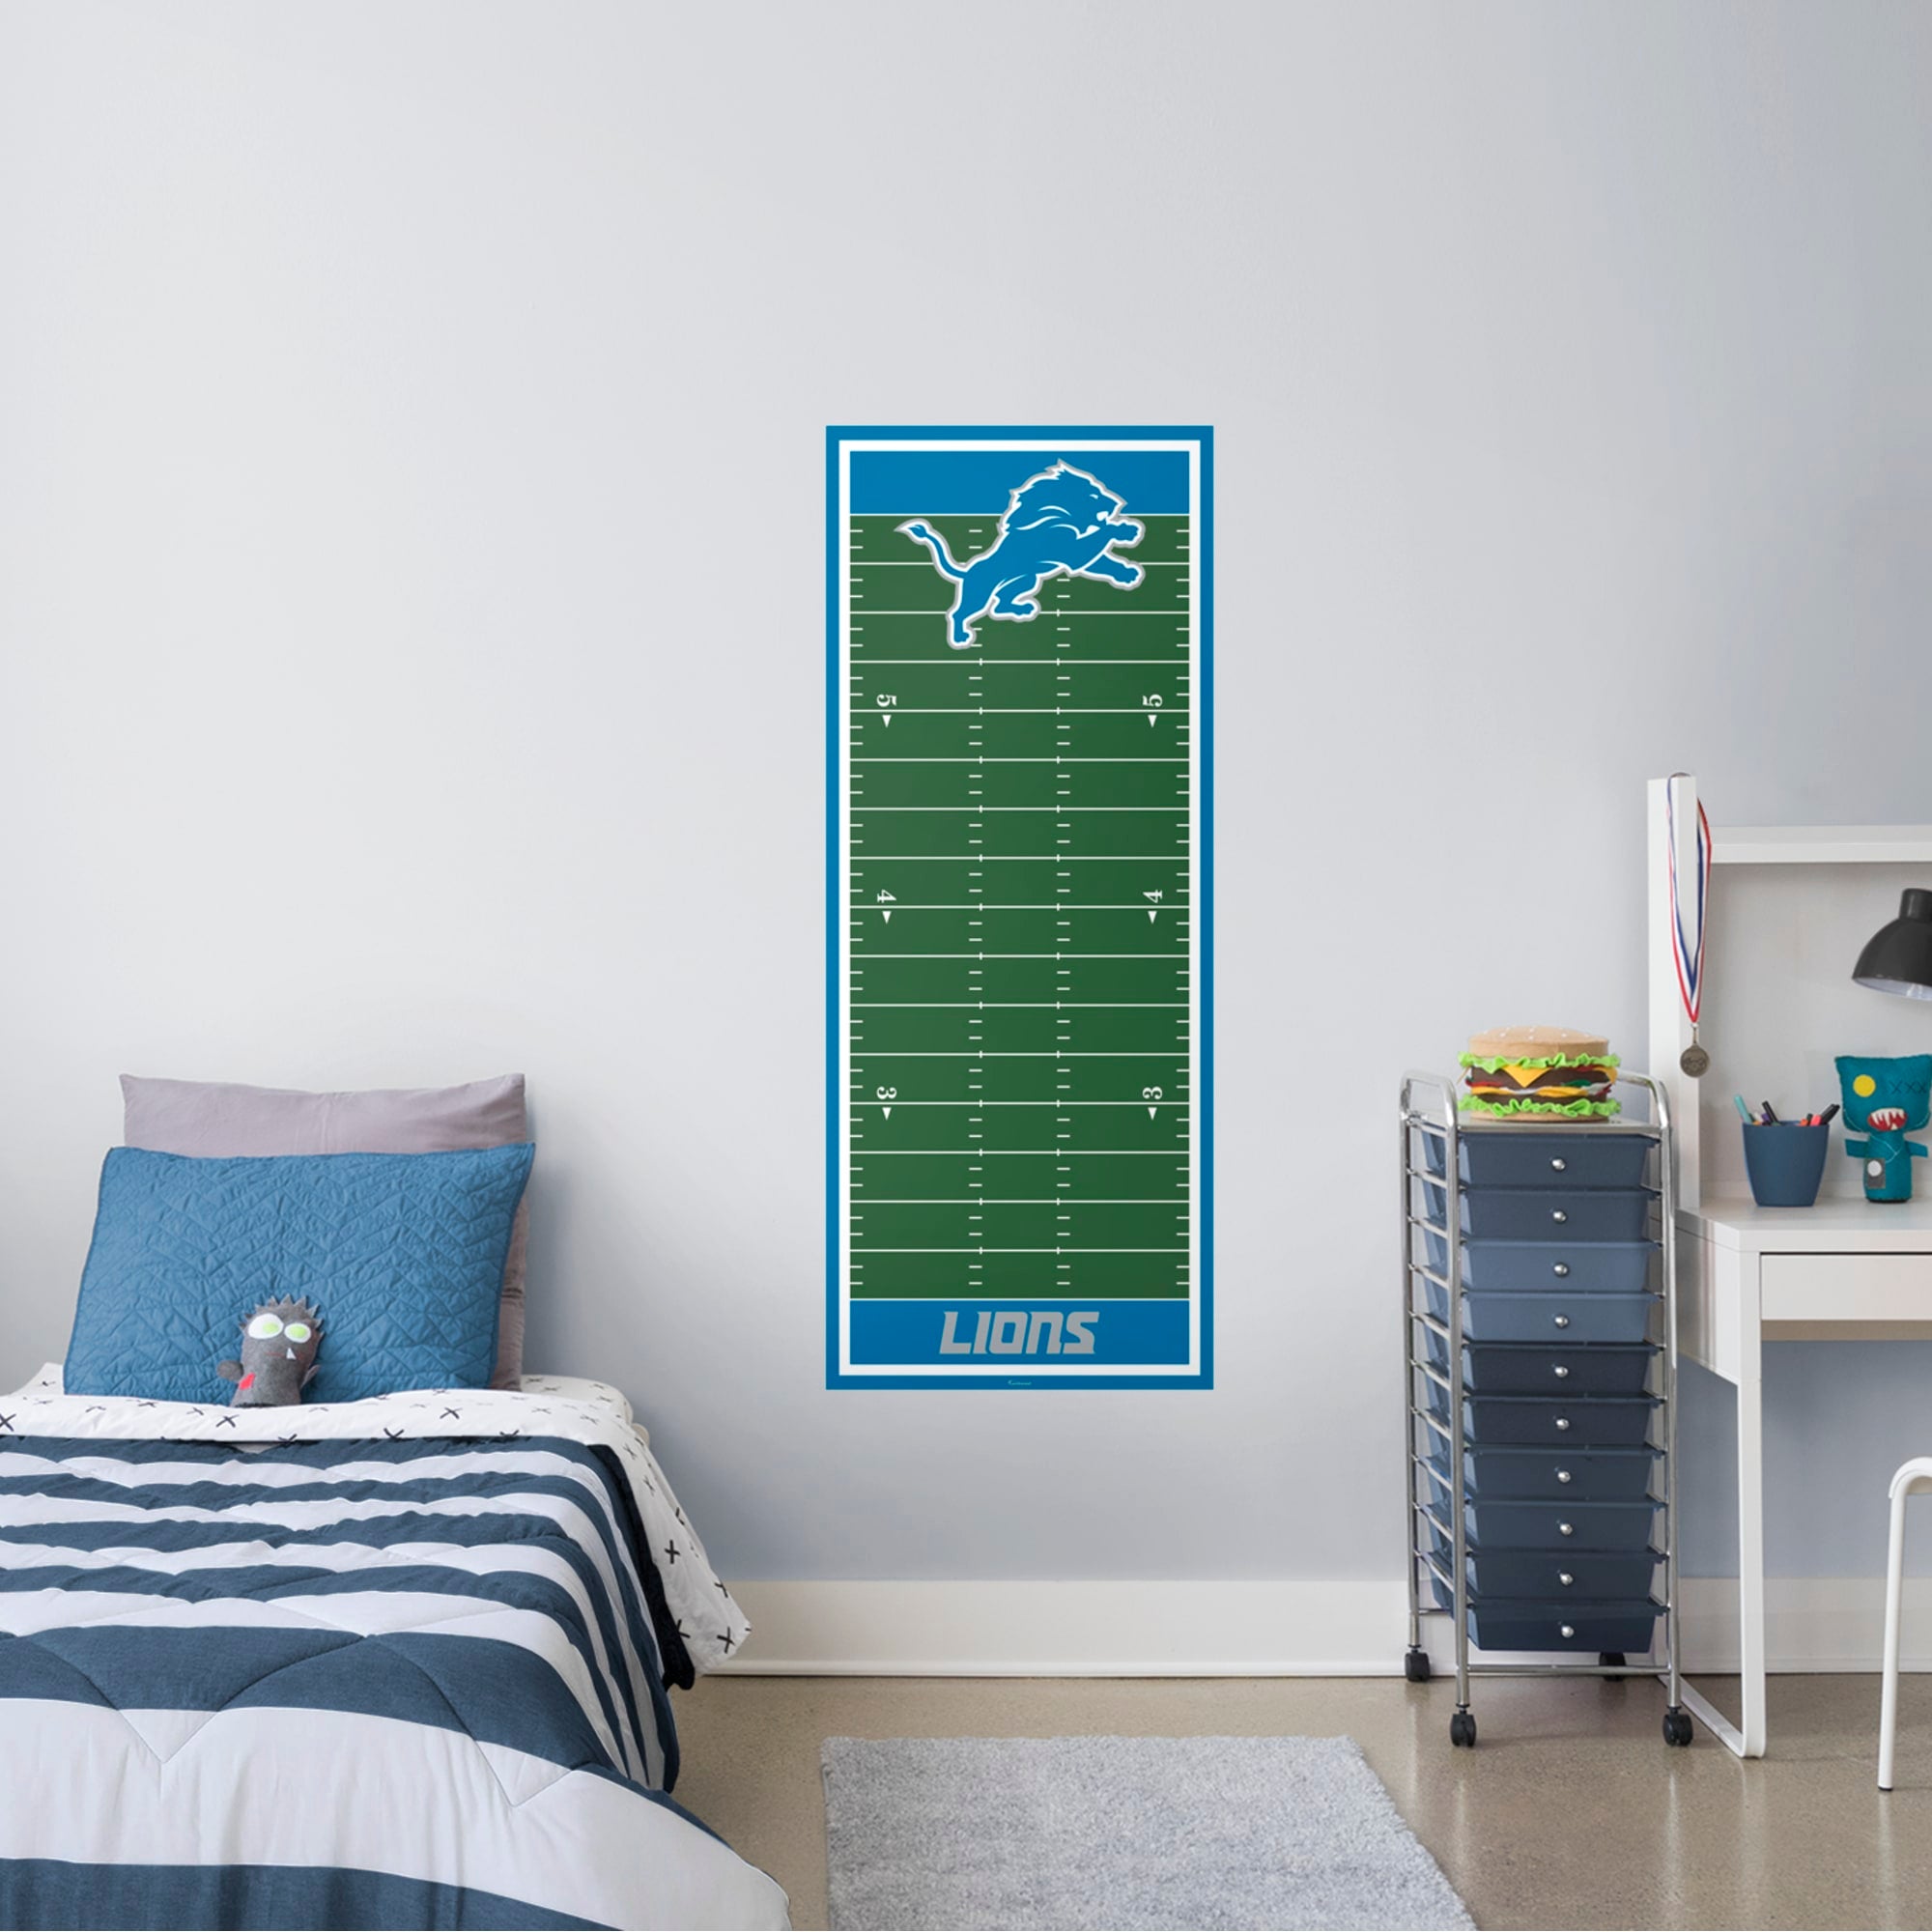 Detroit Lions: Growth Chart - Officially Licensed NFL Removable Wall Graphic 24.0"W x 59.0"H by Fathead | Vinyl